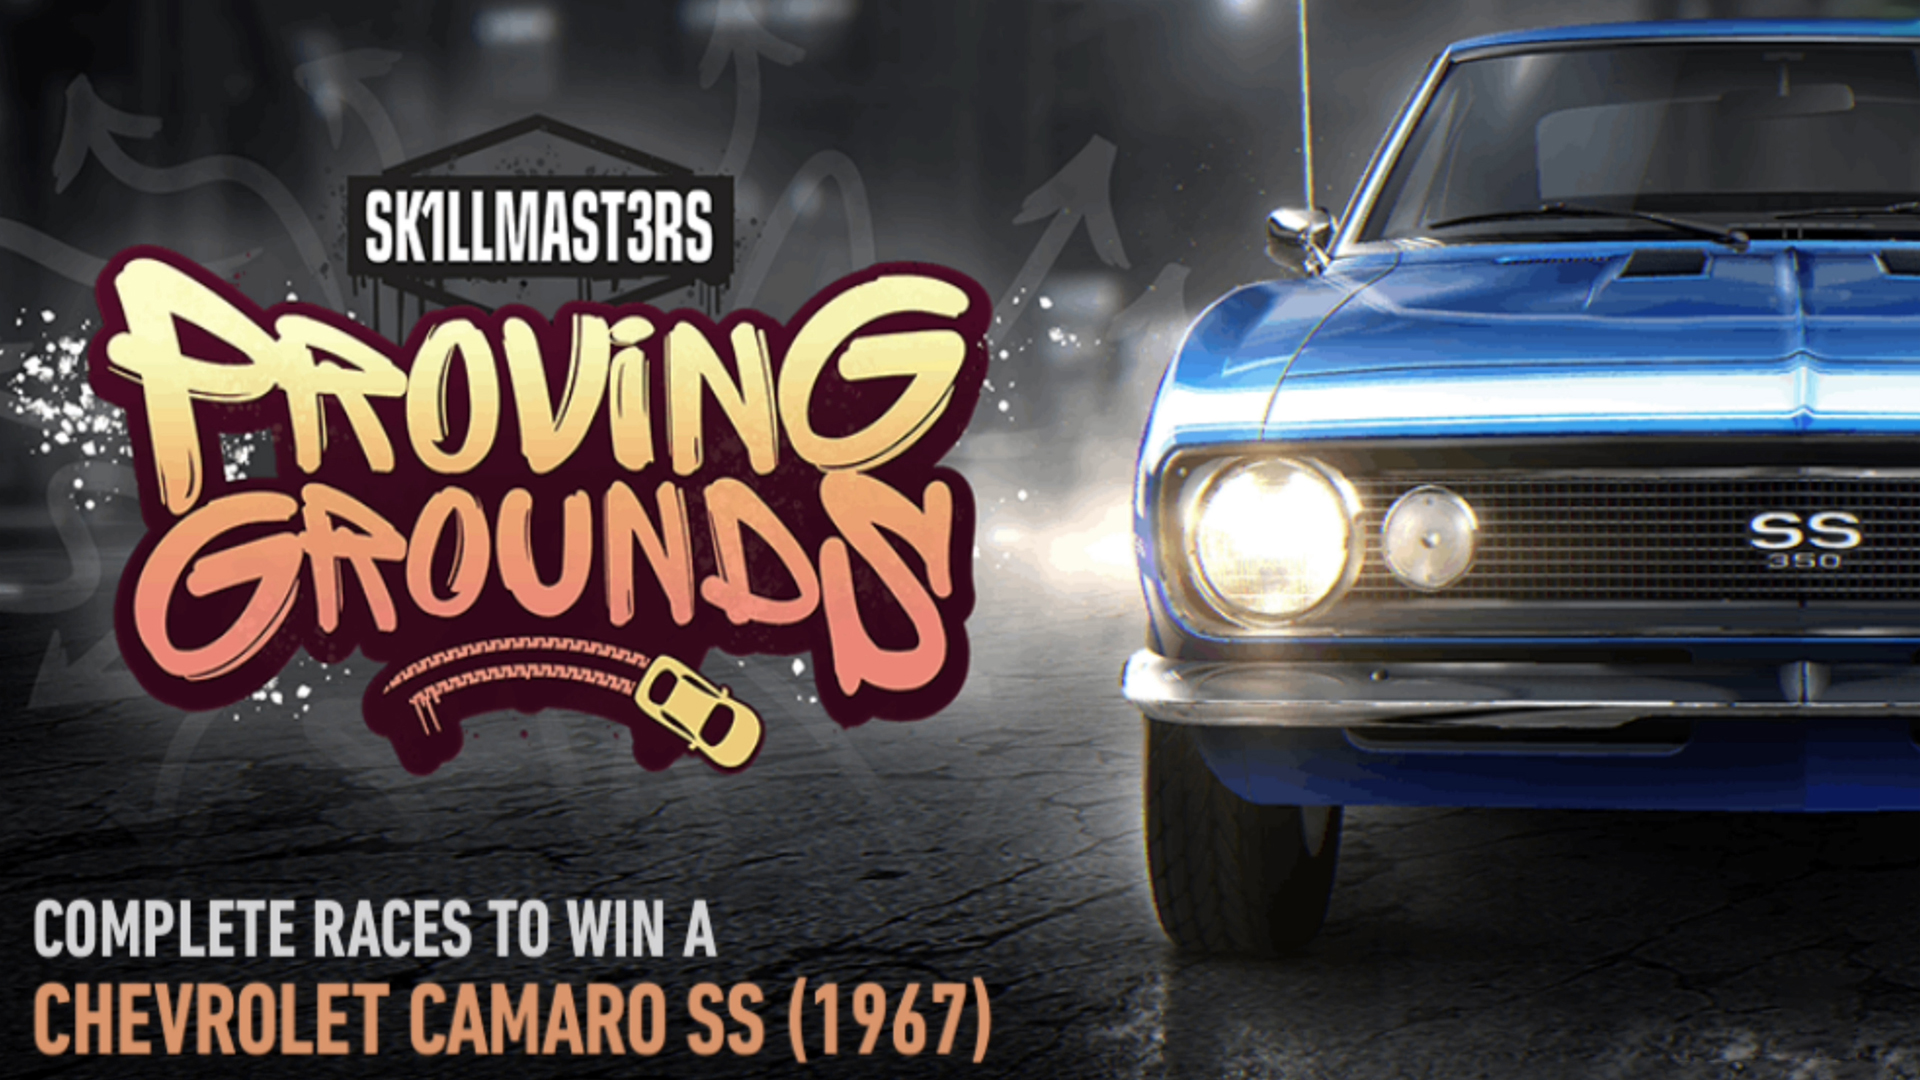 Chevrolet Camaro SS (1967) SK1LLMAST3RS Proving Grounds NFS No Limits FULL EVENT